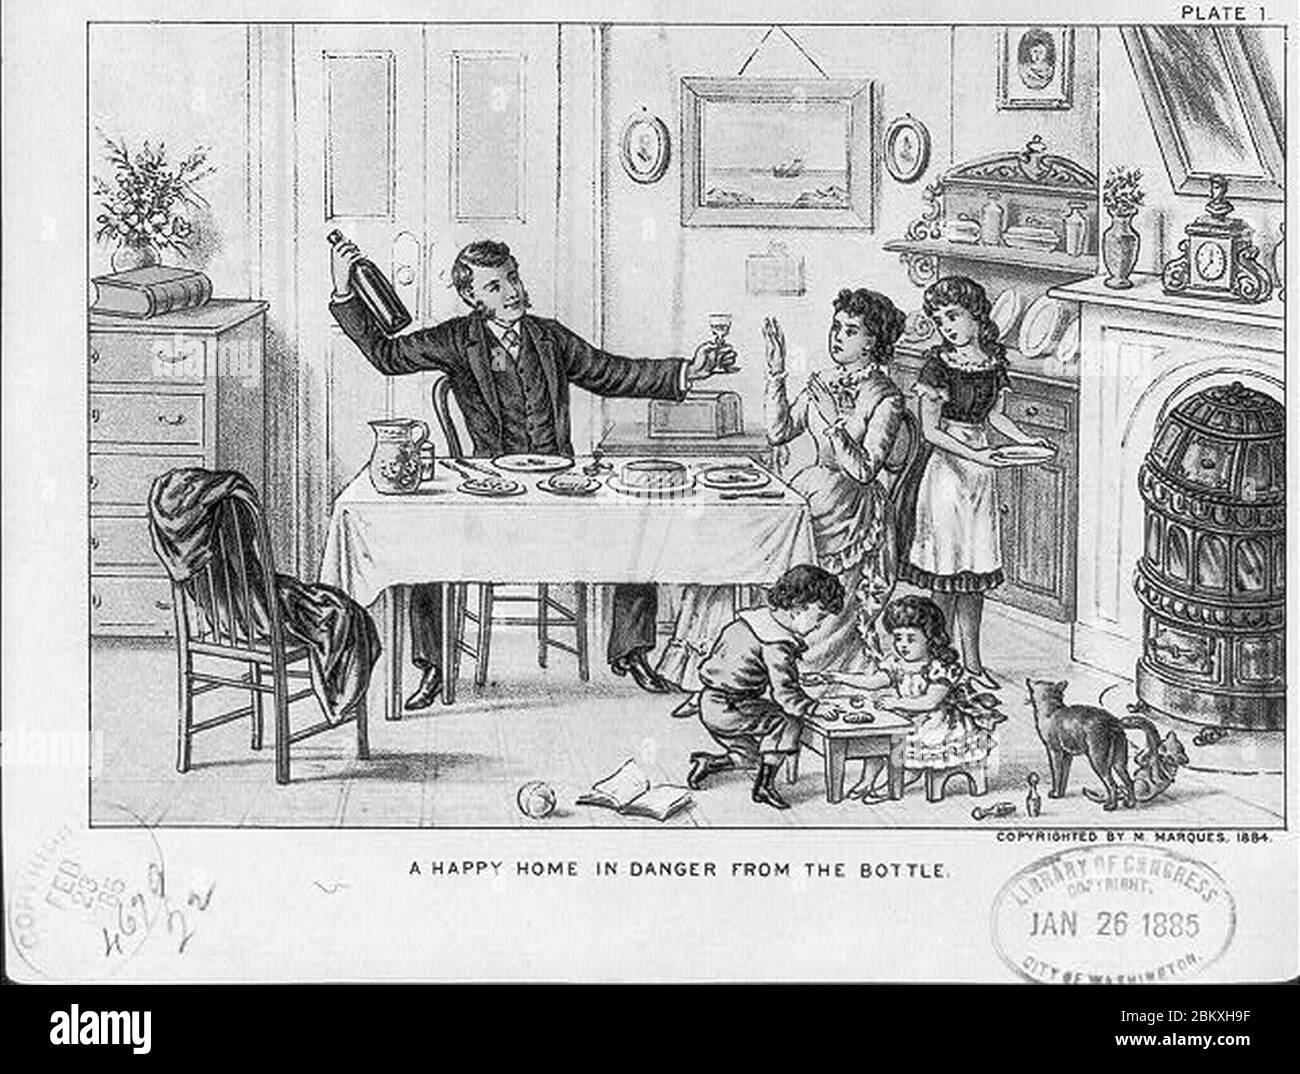 Illustration of the dangers of alcoholic beverages)- A happy home in danger from the bottle pl. 1 Stock Photo